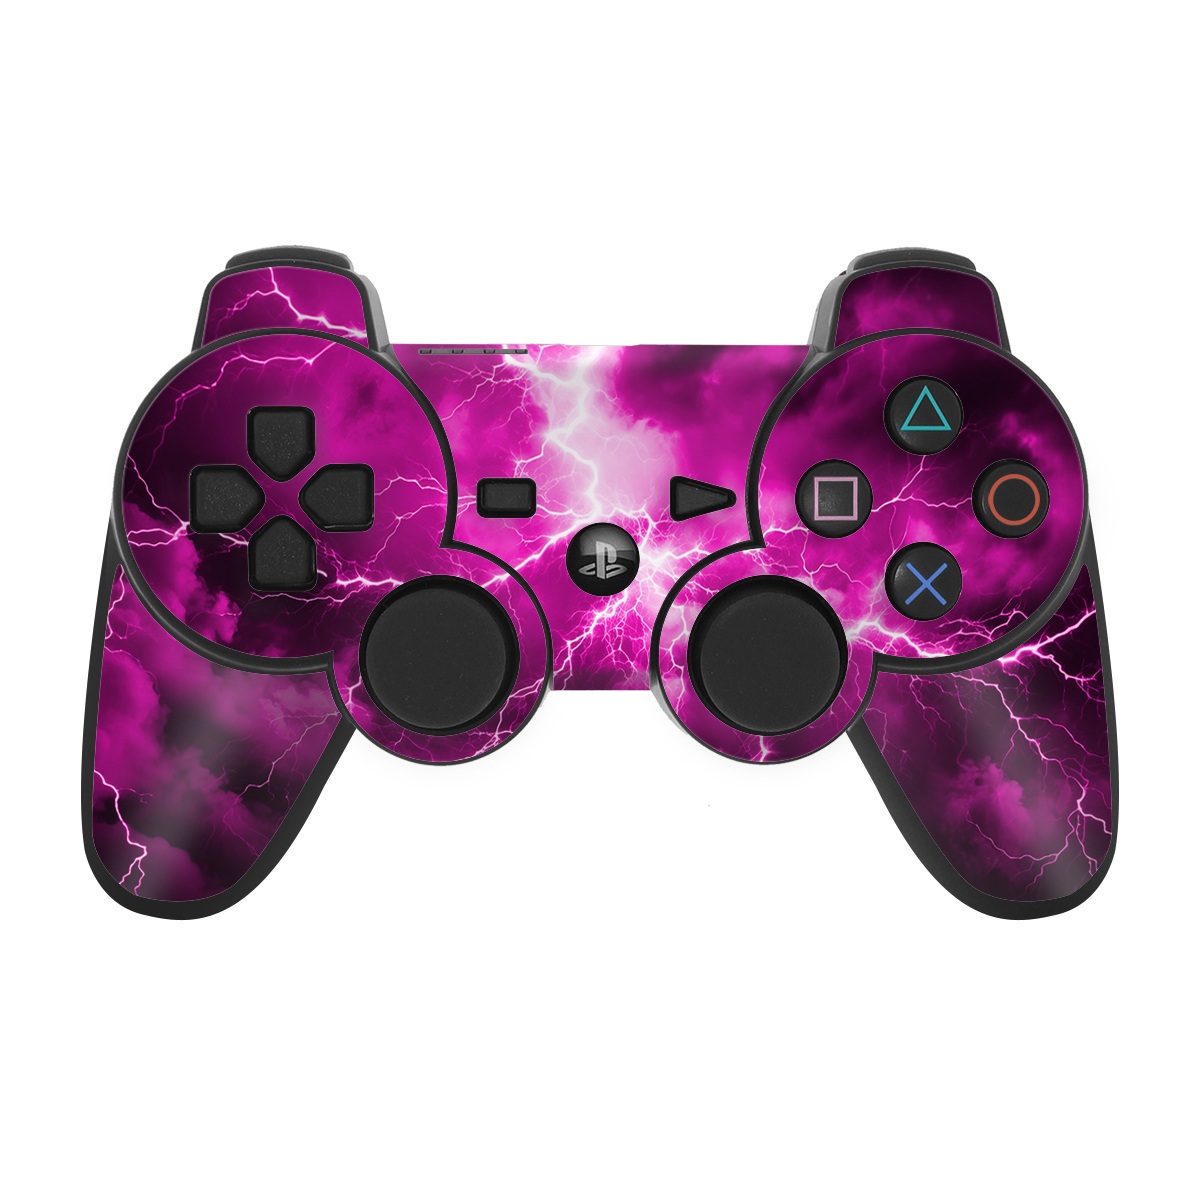 PS3 Controller Skin design of Sky, Thunder, Lightning, Thunderstorm, Atmosphere, White, Purple, Light, Nature, Water, with black, pink colors